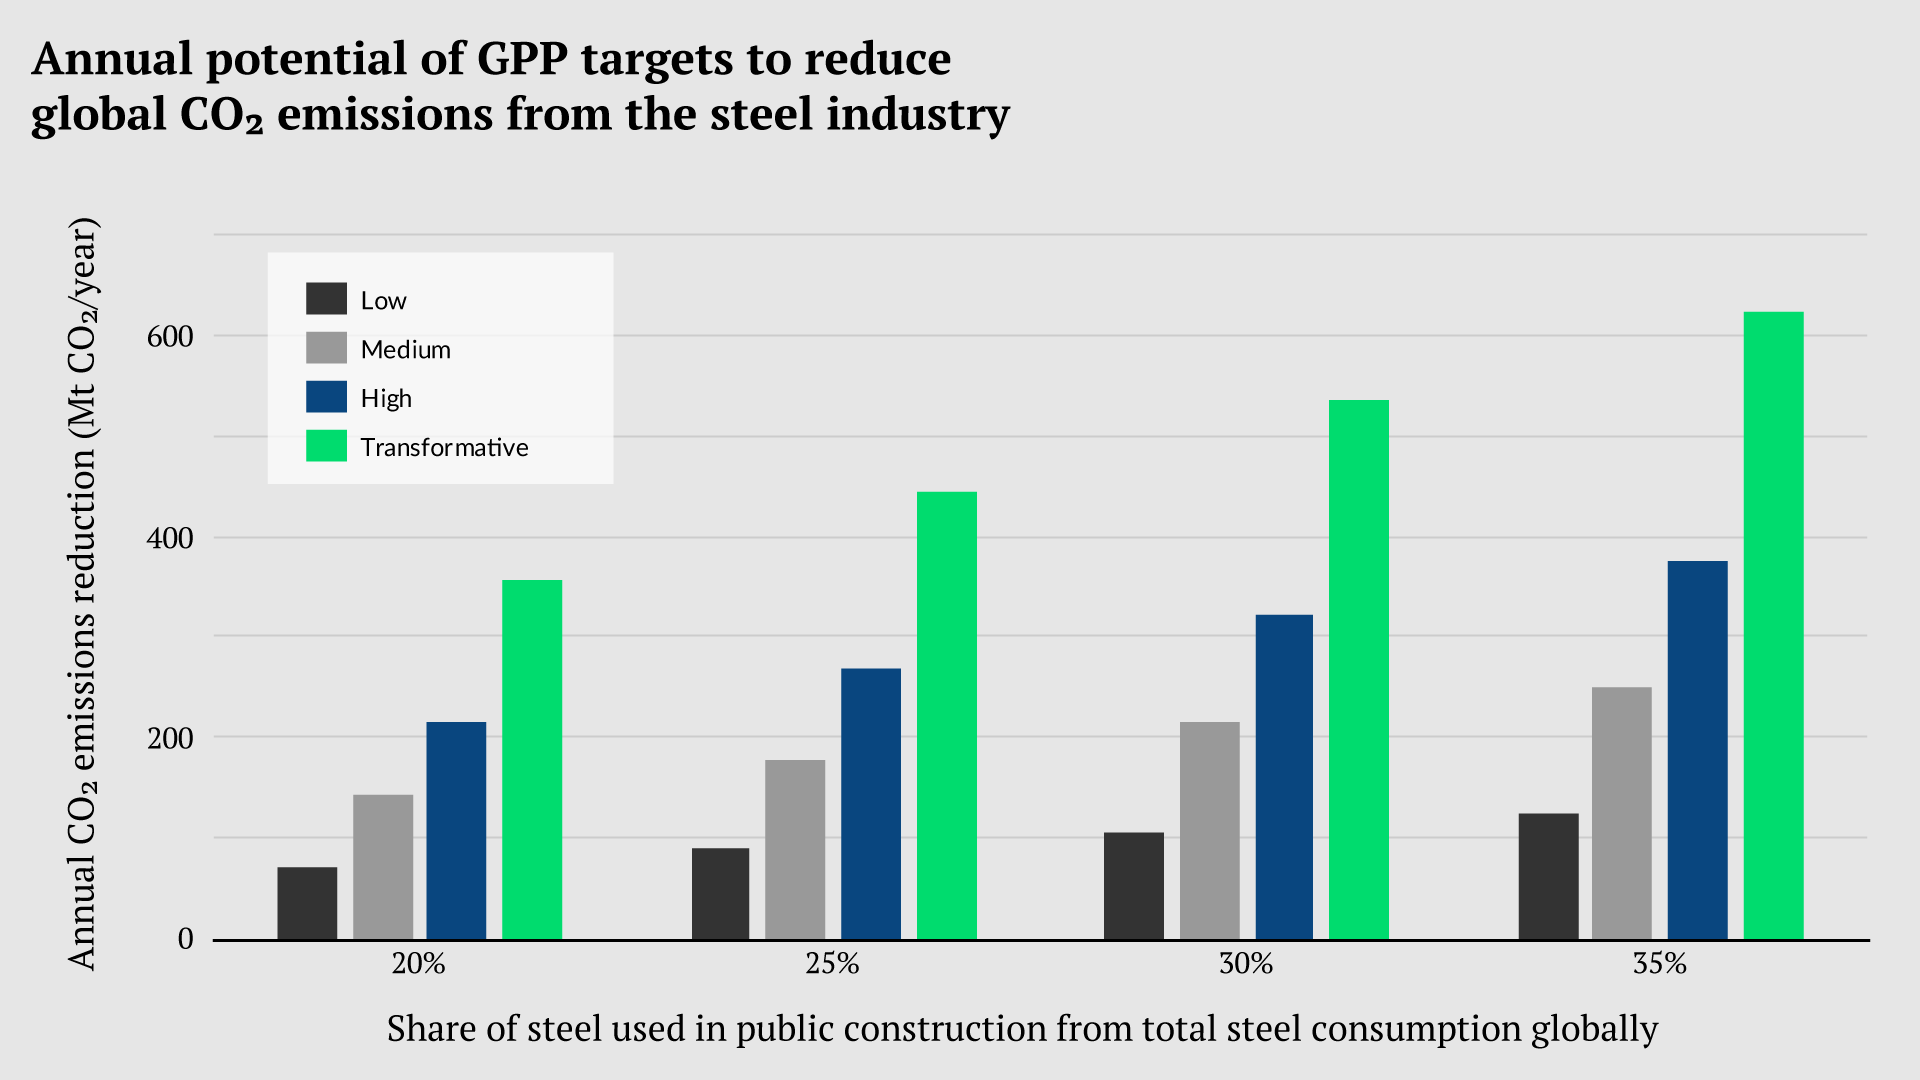 Annual CO2 reduction potential from GPP of steel globally